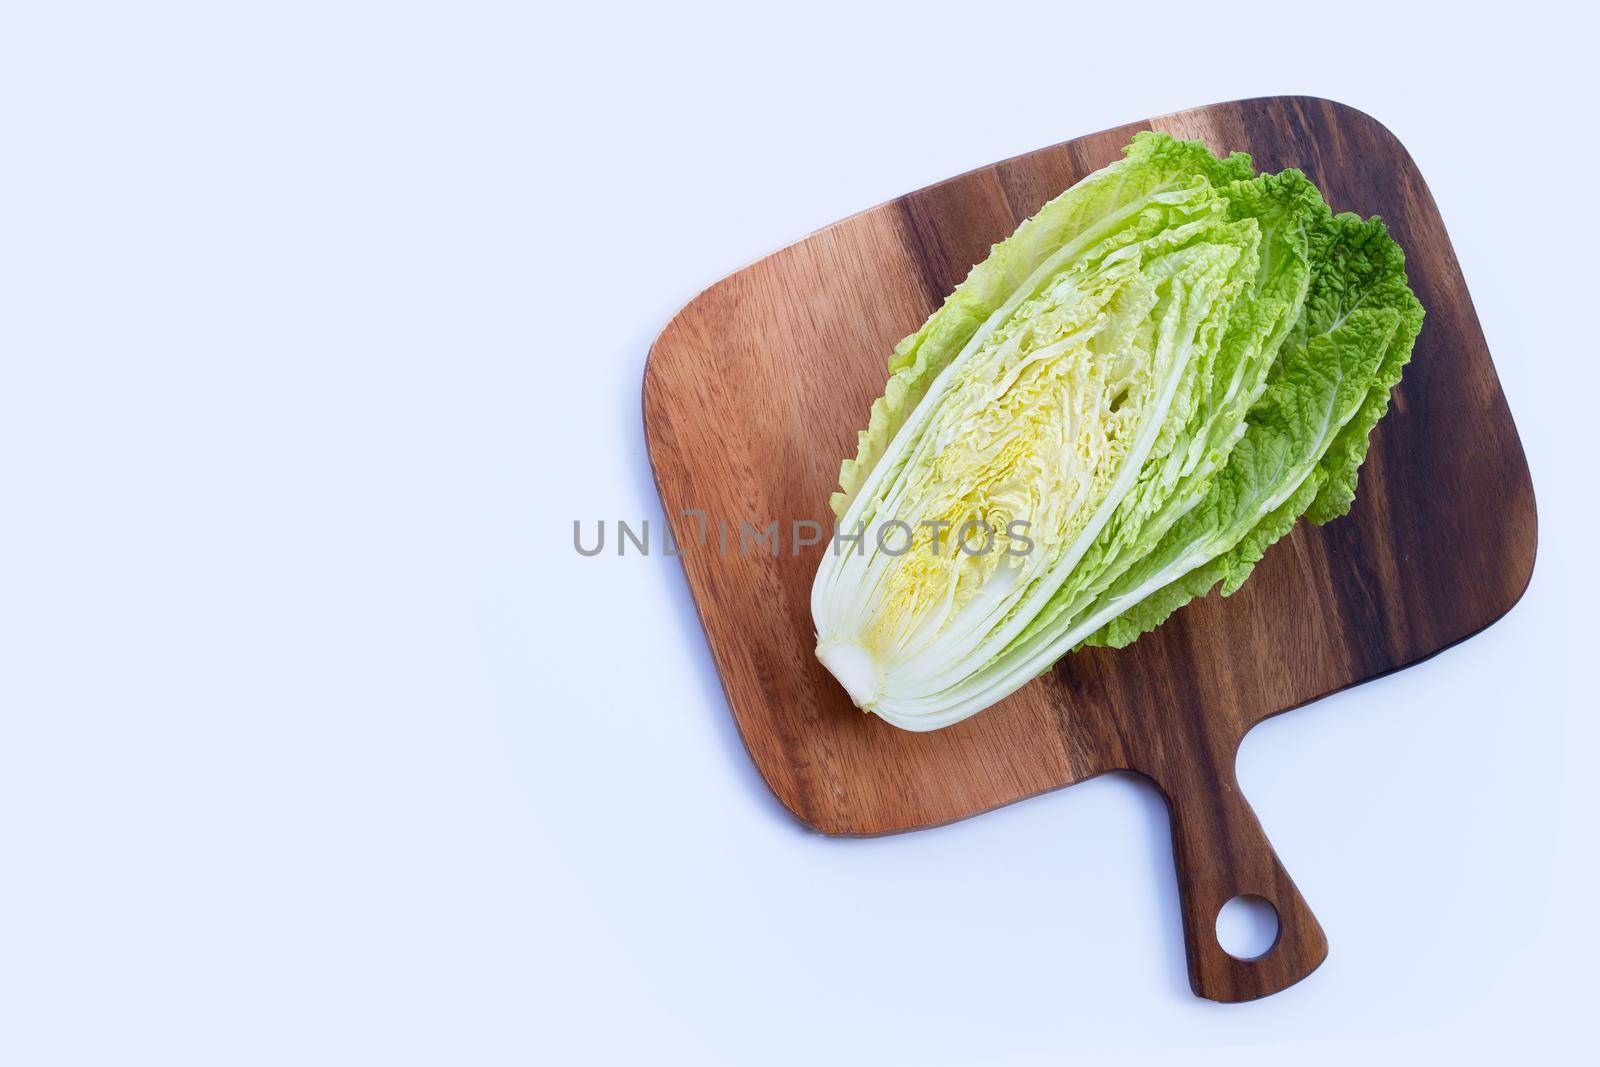 Chinese cabbage on wooden cutting board on white background. Copy space